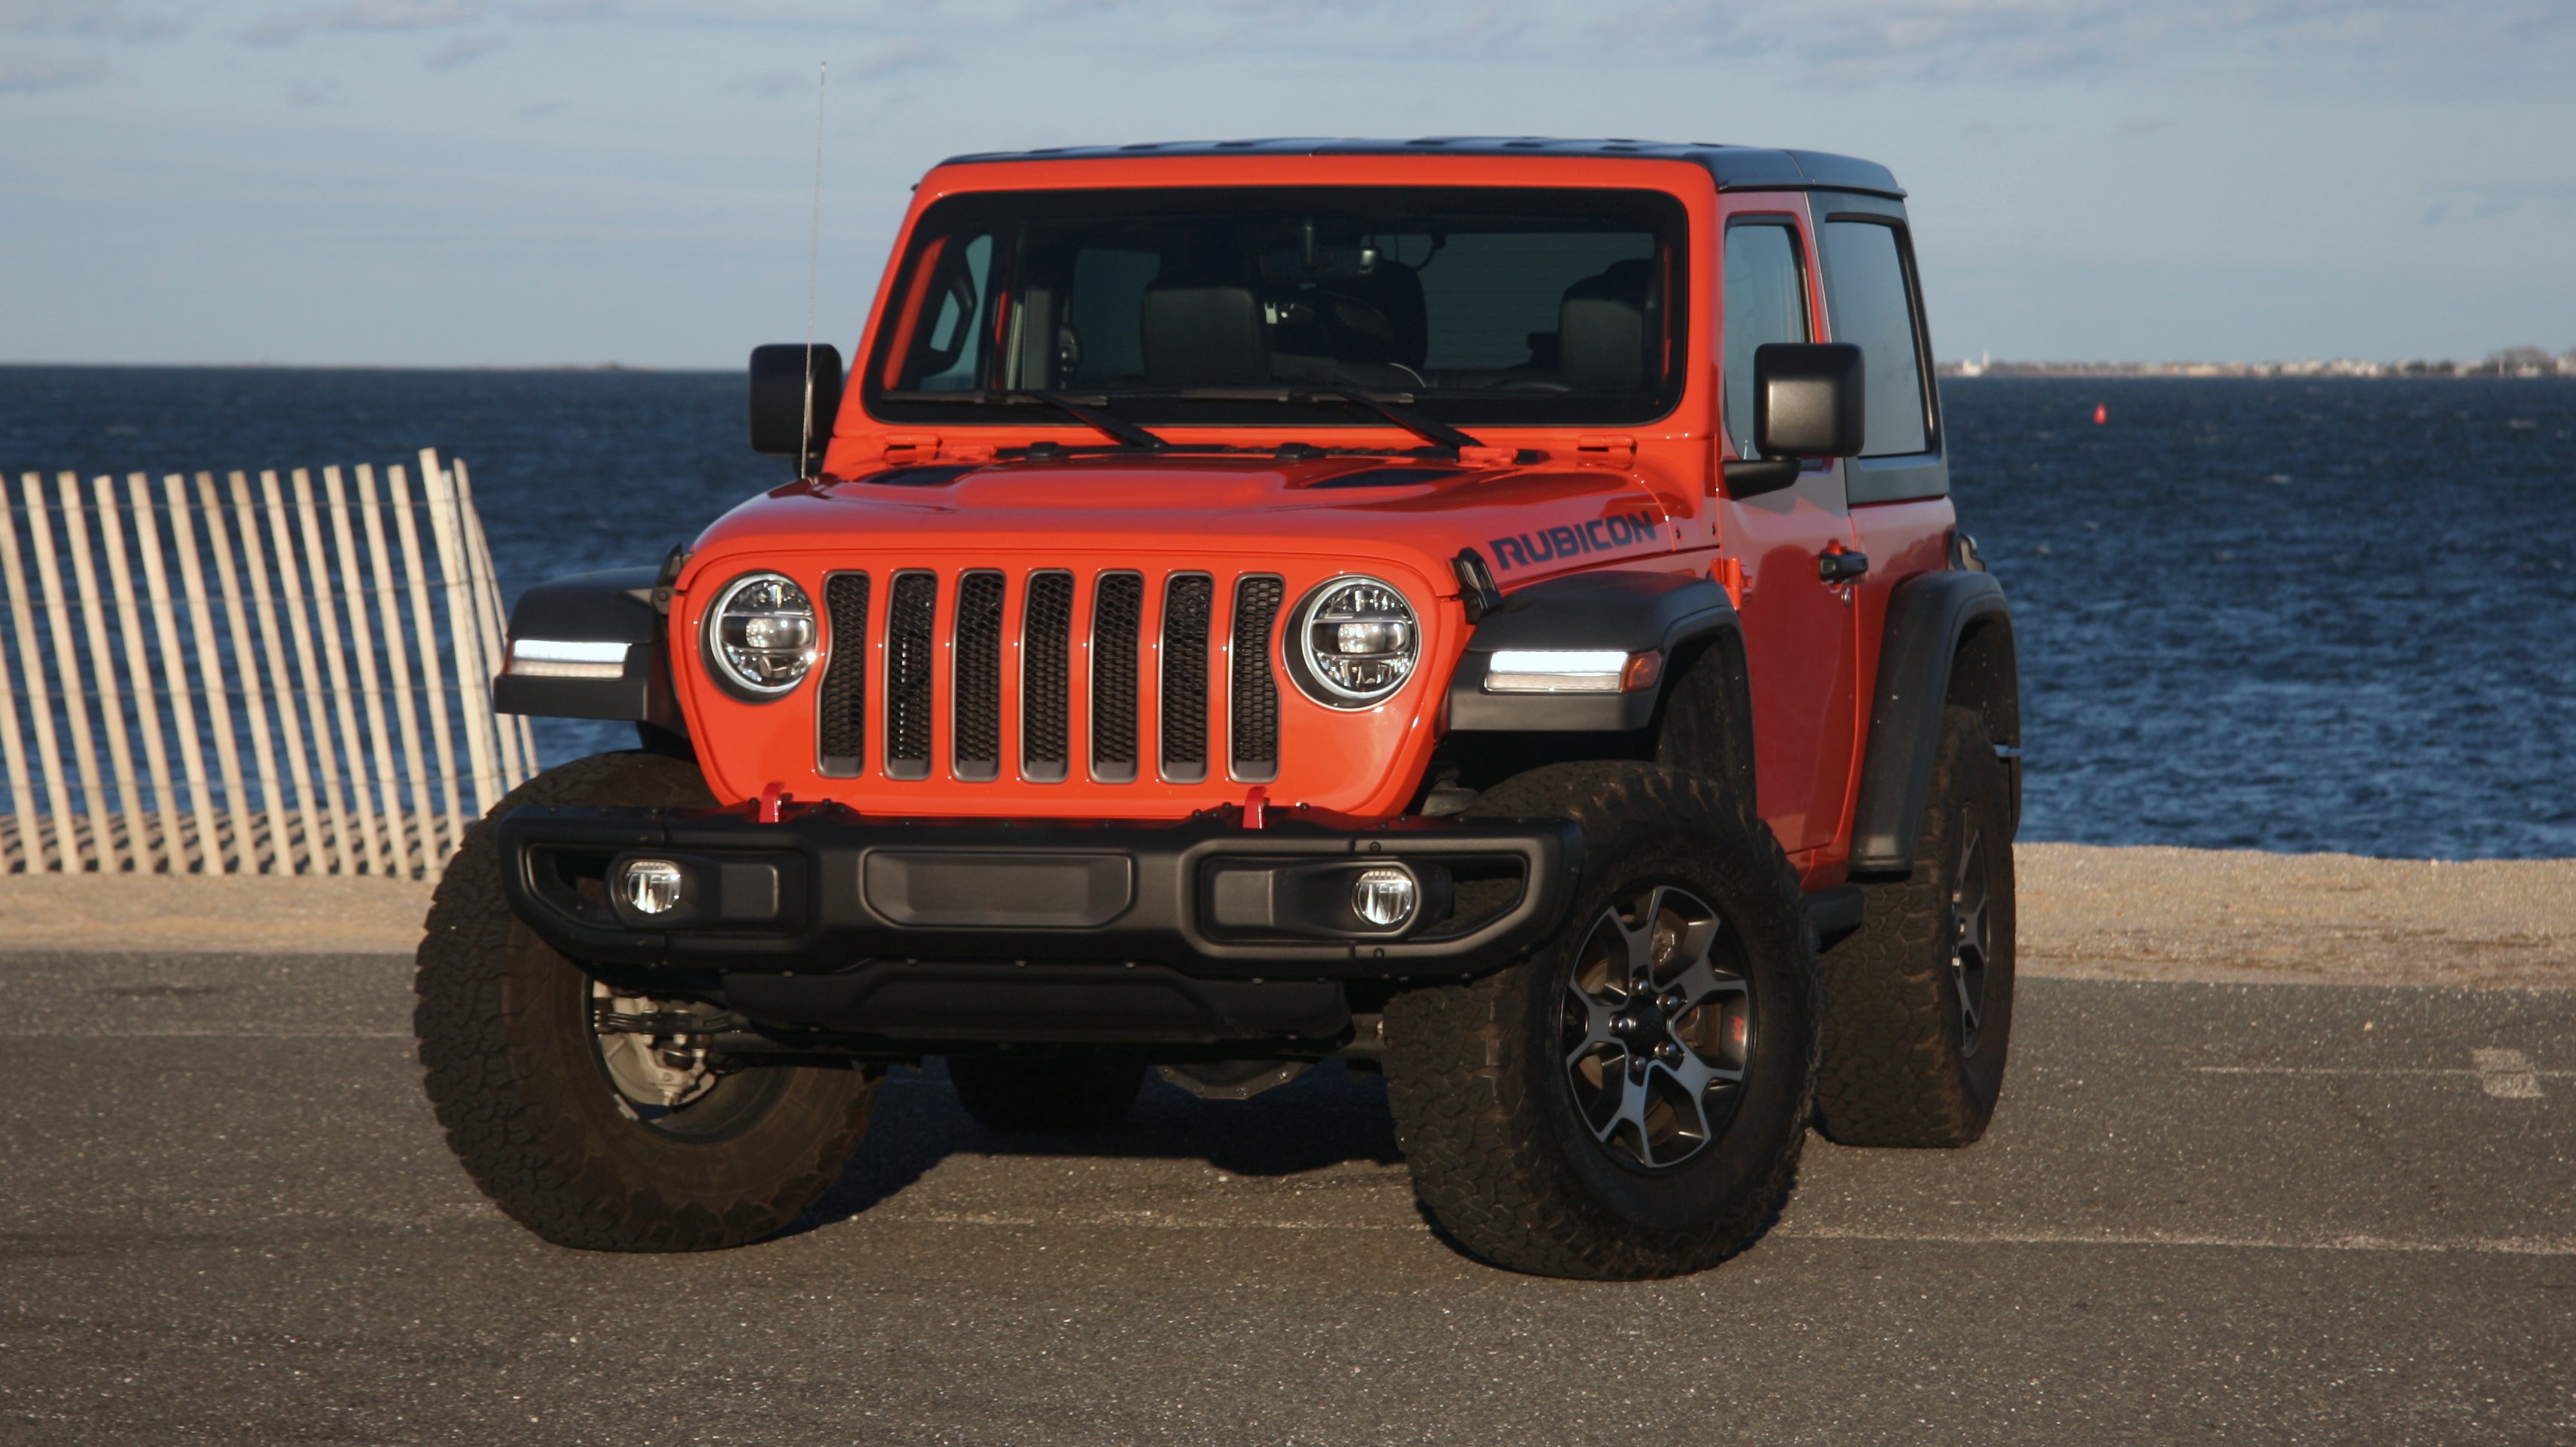 2019 Jeep Wrangler Rubicon New Dad Review: The Little Big Man of Off-Road Trucks